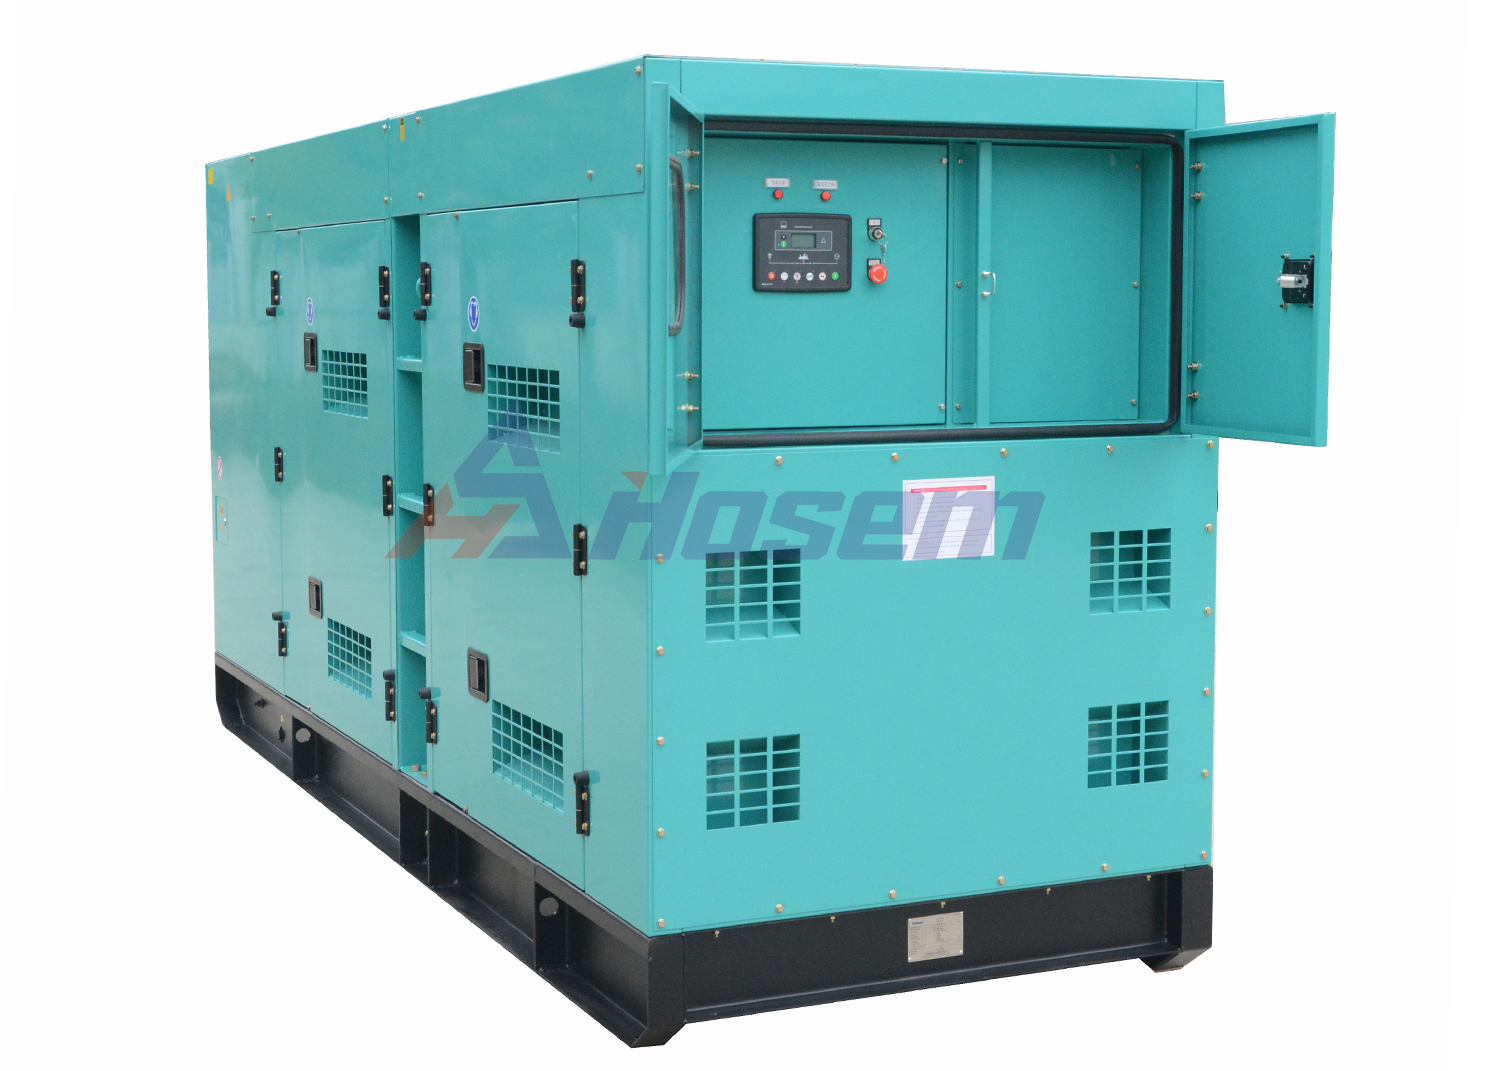 Water cooled Diesel Generator Powered by SDEC Diesel Engine Max Output 250kVA for Industrial